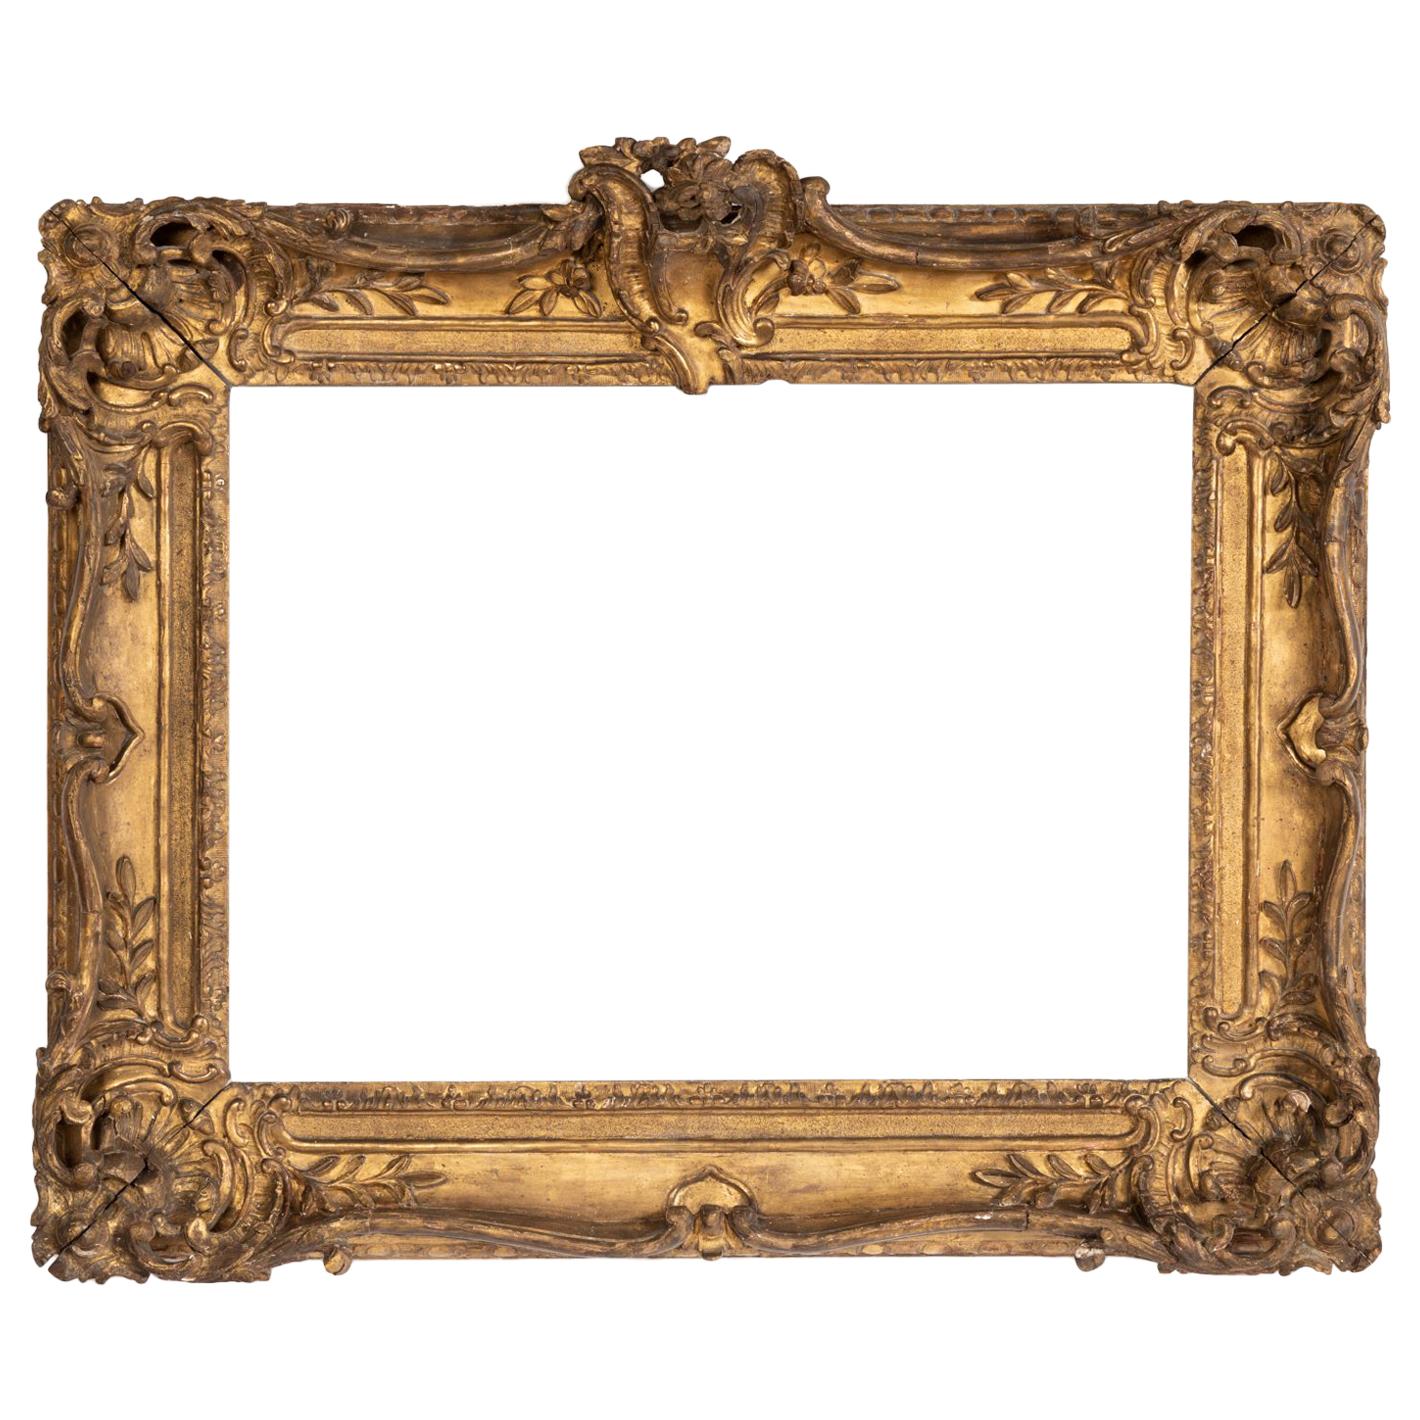 Superb Louis XV Period, Carved Giltwood Frame or Mirror France, Mid-18th Century For Sale